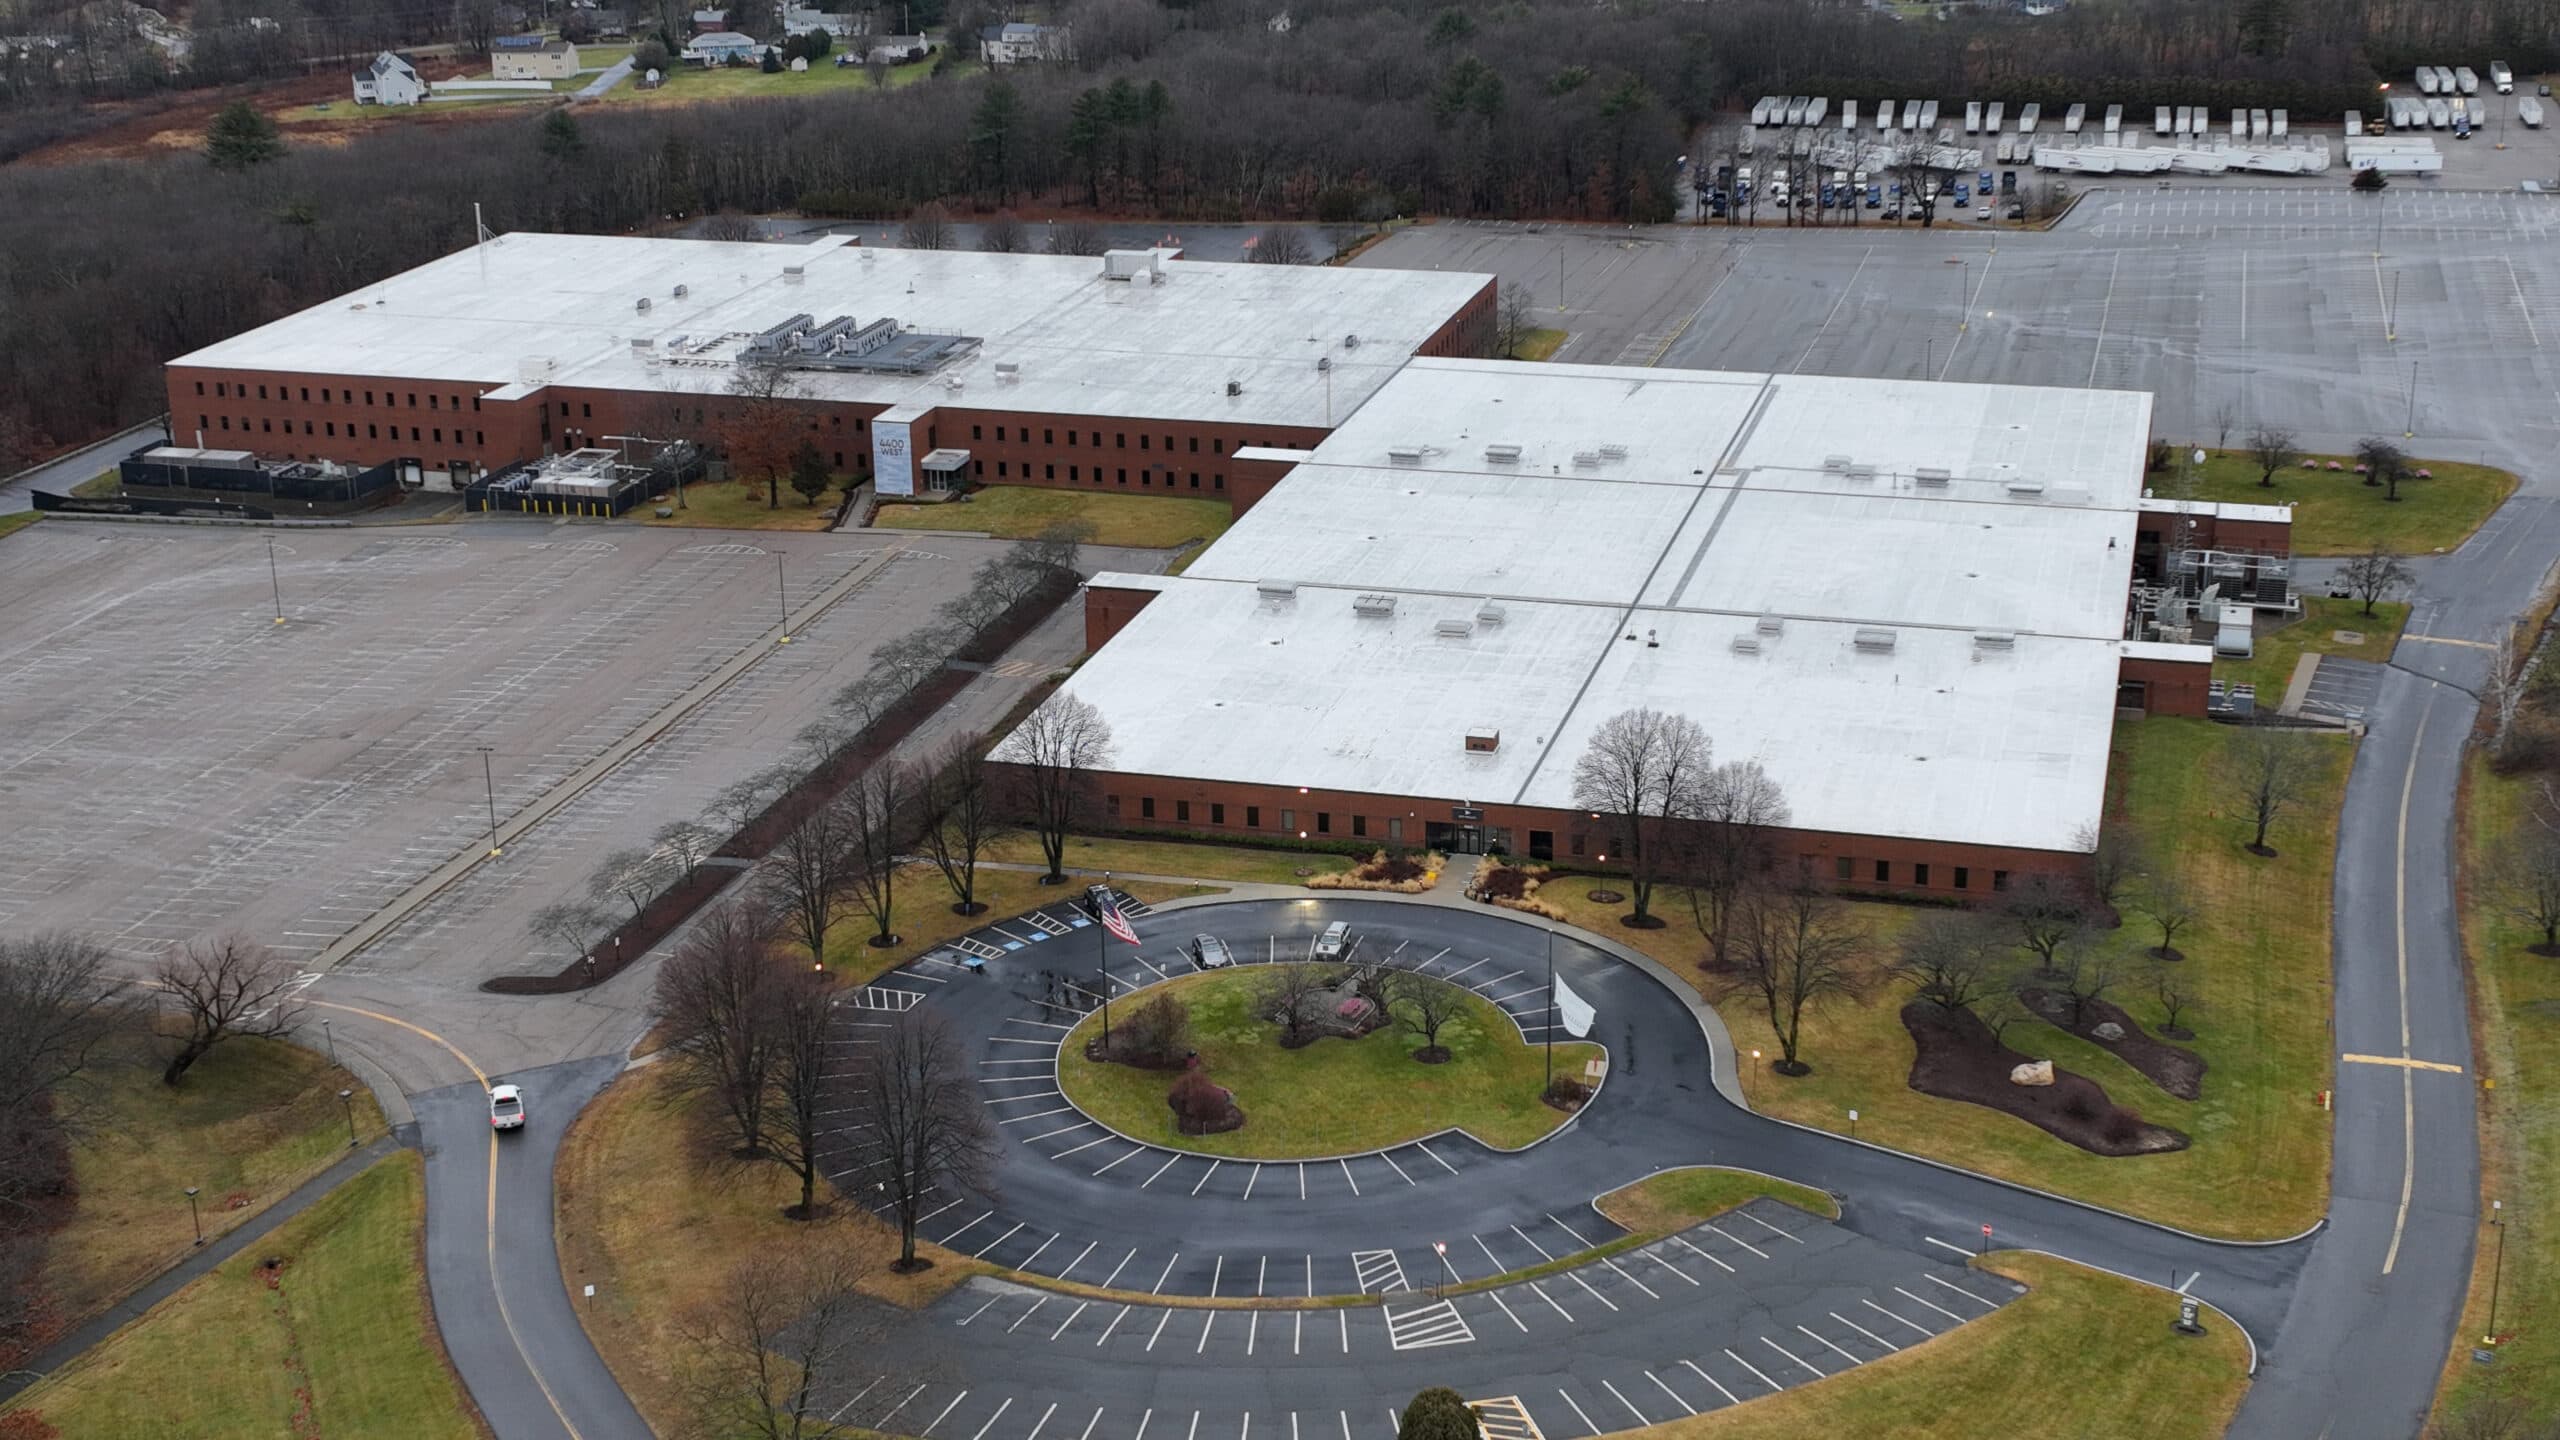 Southborough hopes to discuss collaboration, mitigation funds with Amazon